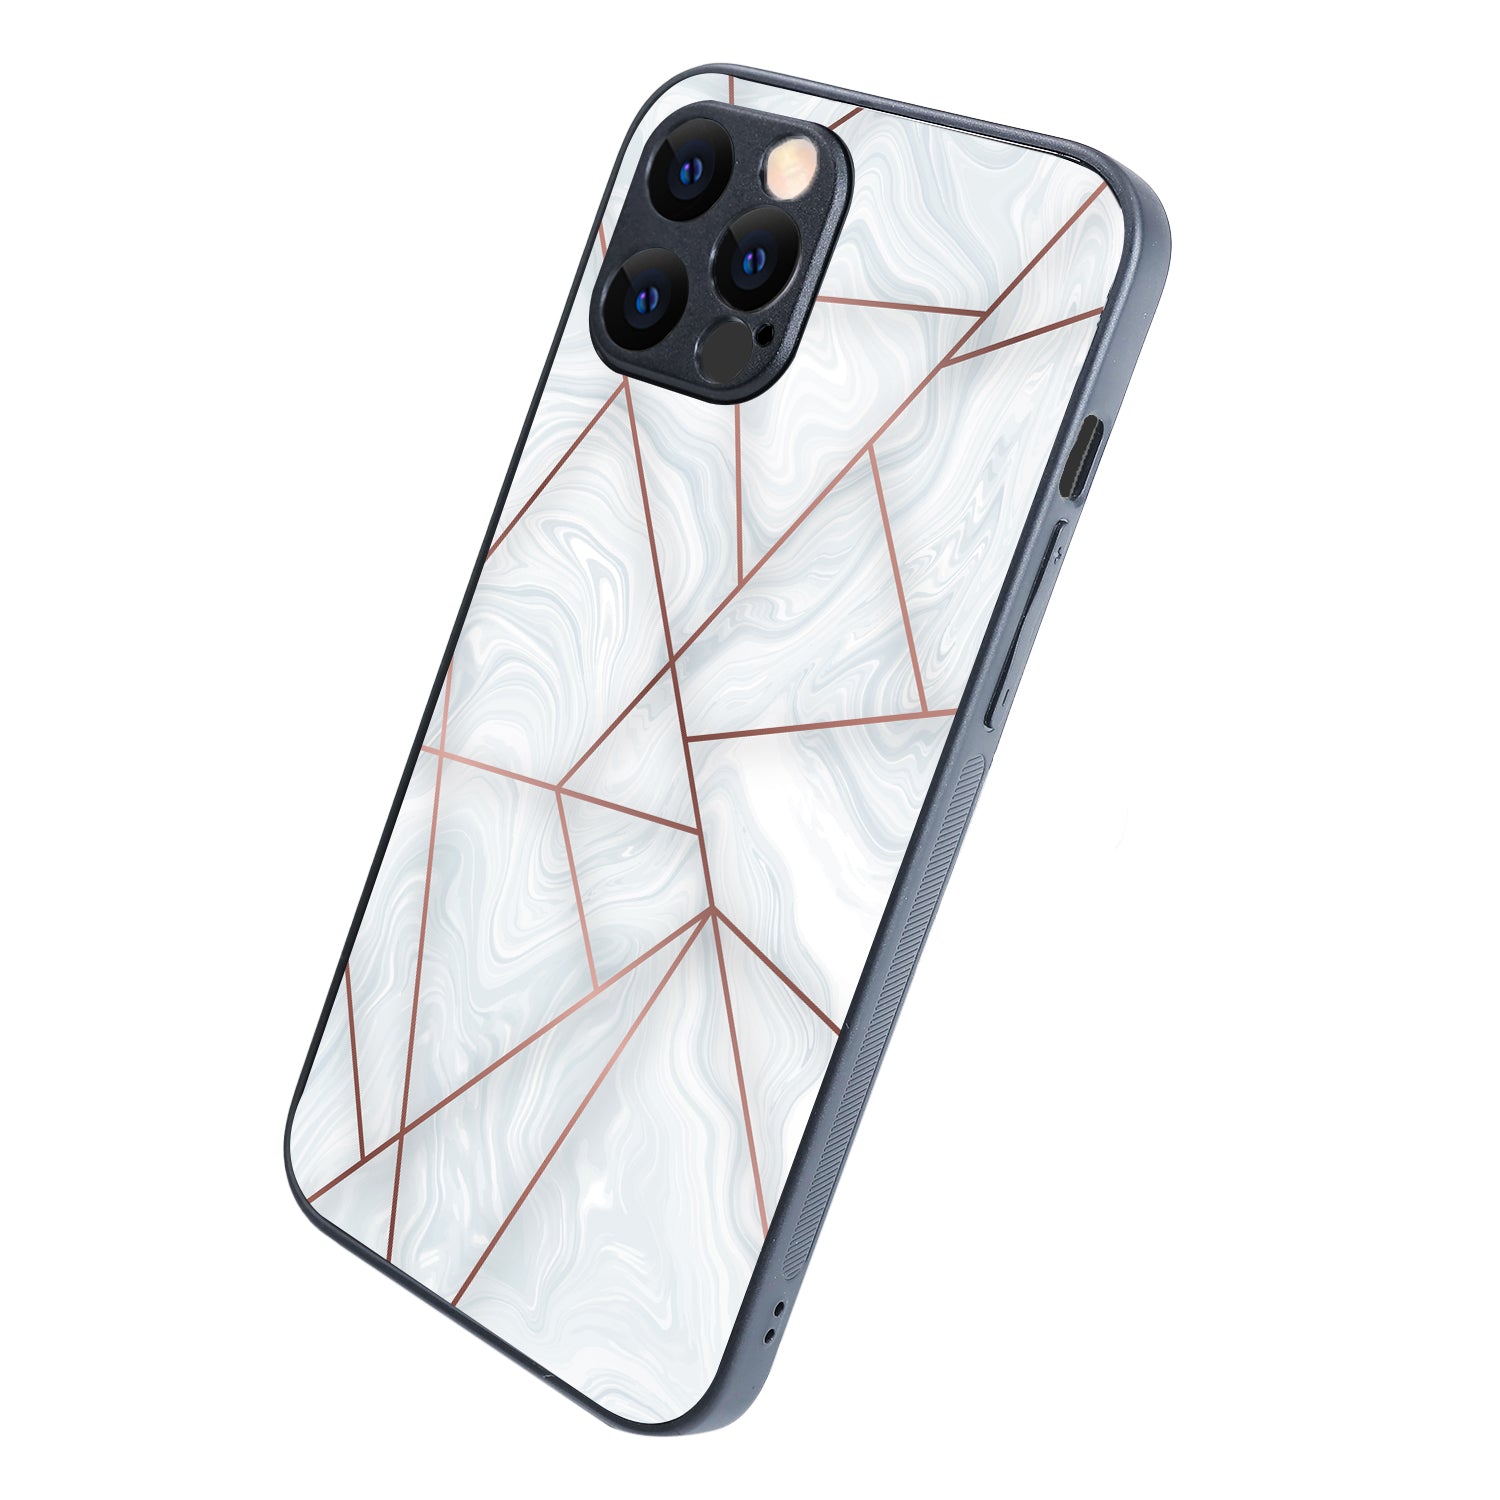 White Tile Marble iPhone 12 Pro Max Case